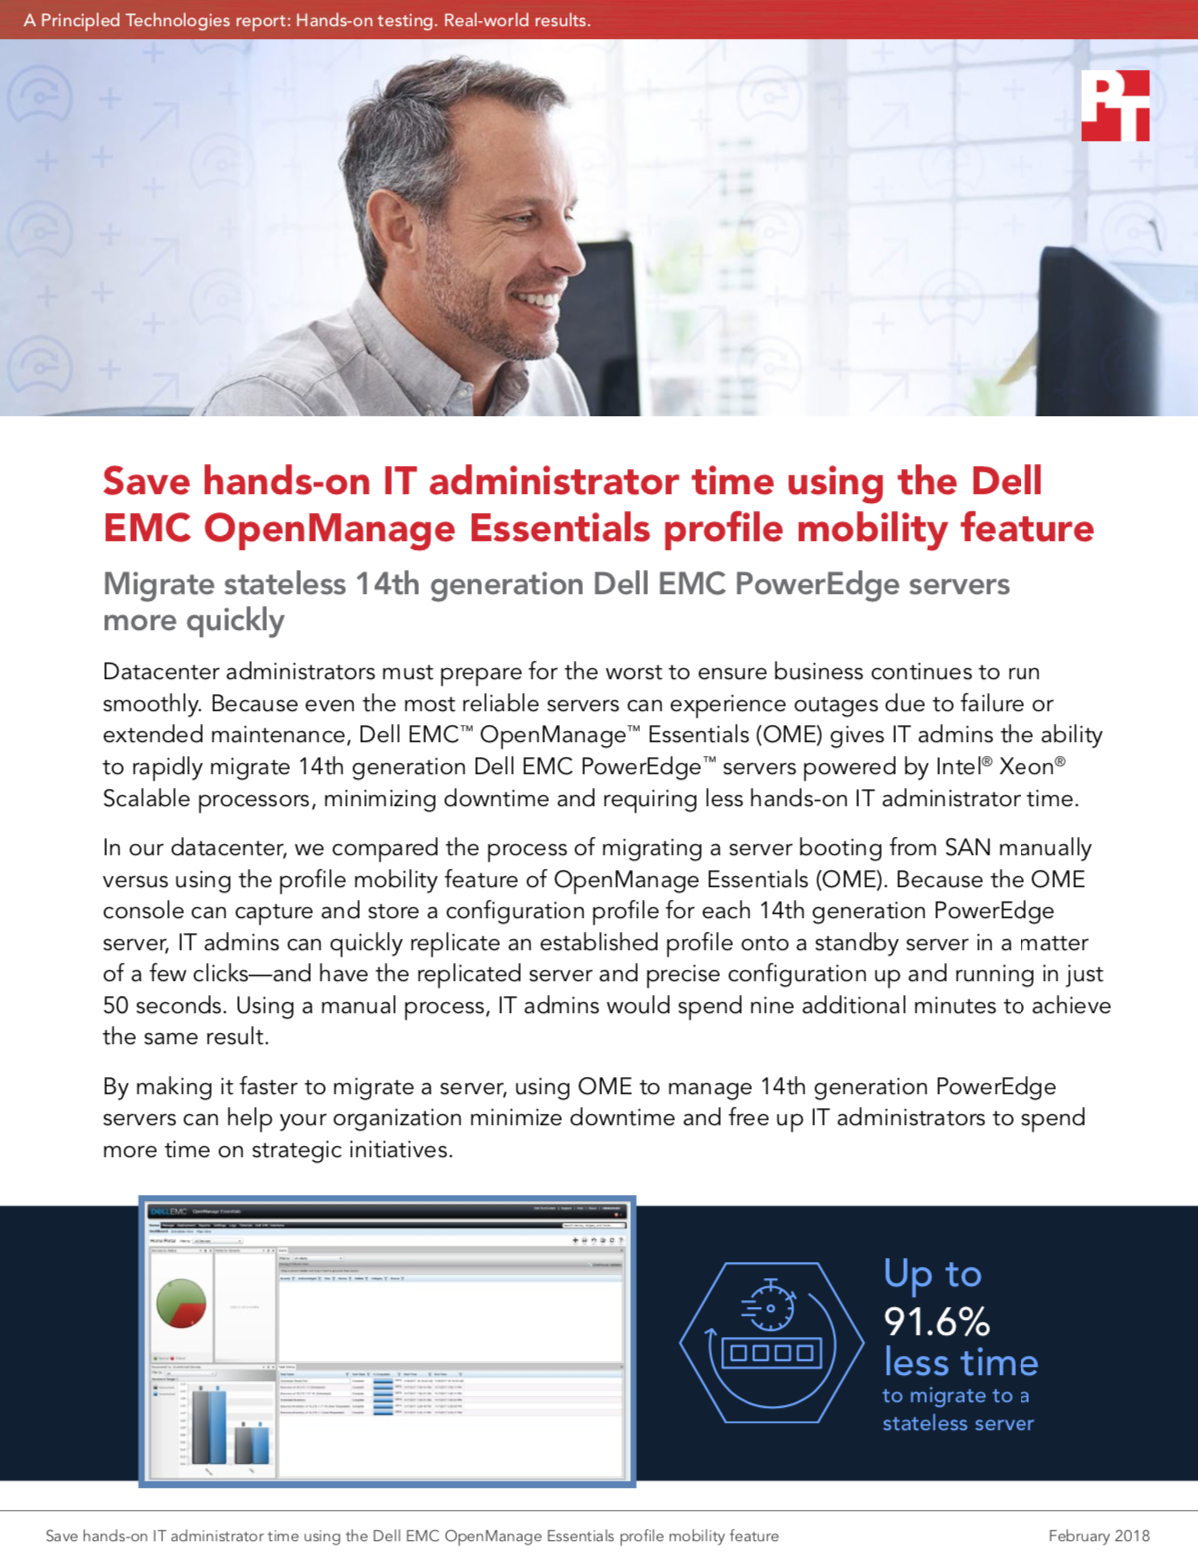 Save hands-on IT administrator time using the Dell EMC OpenManage Essentials profile mobility feature